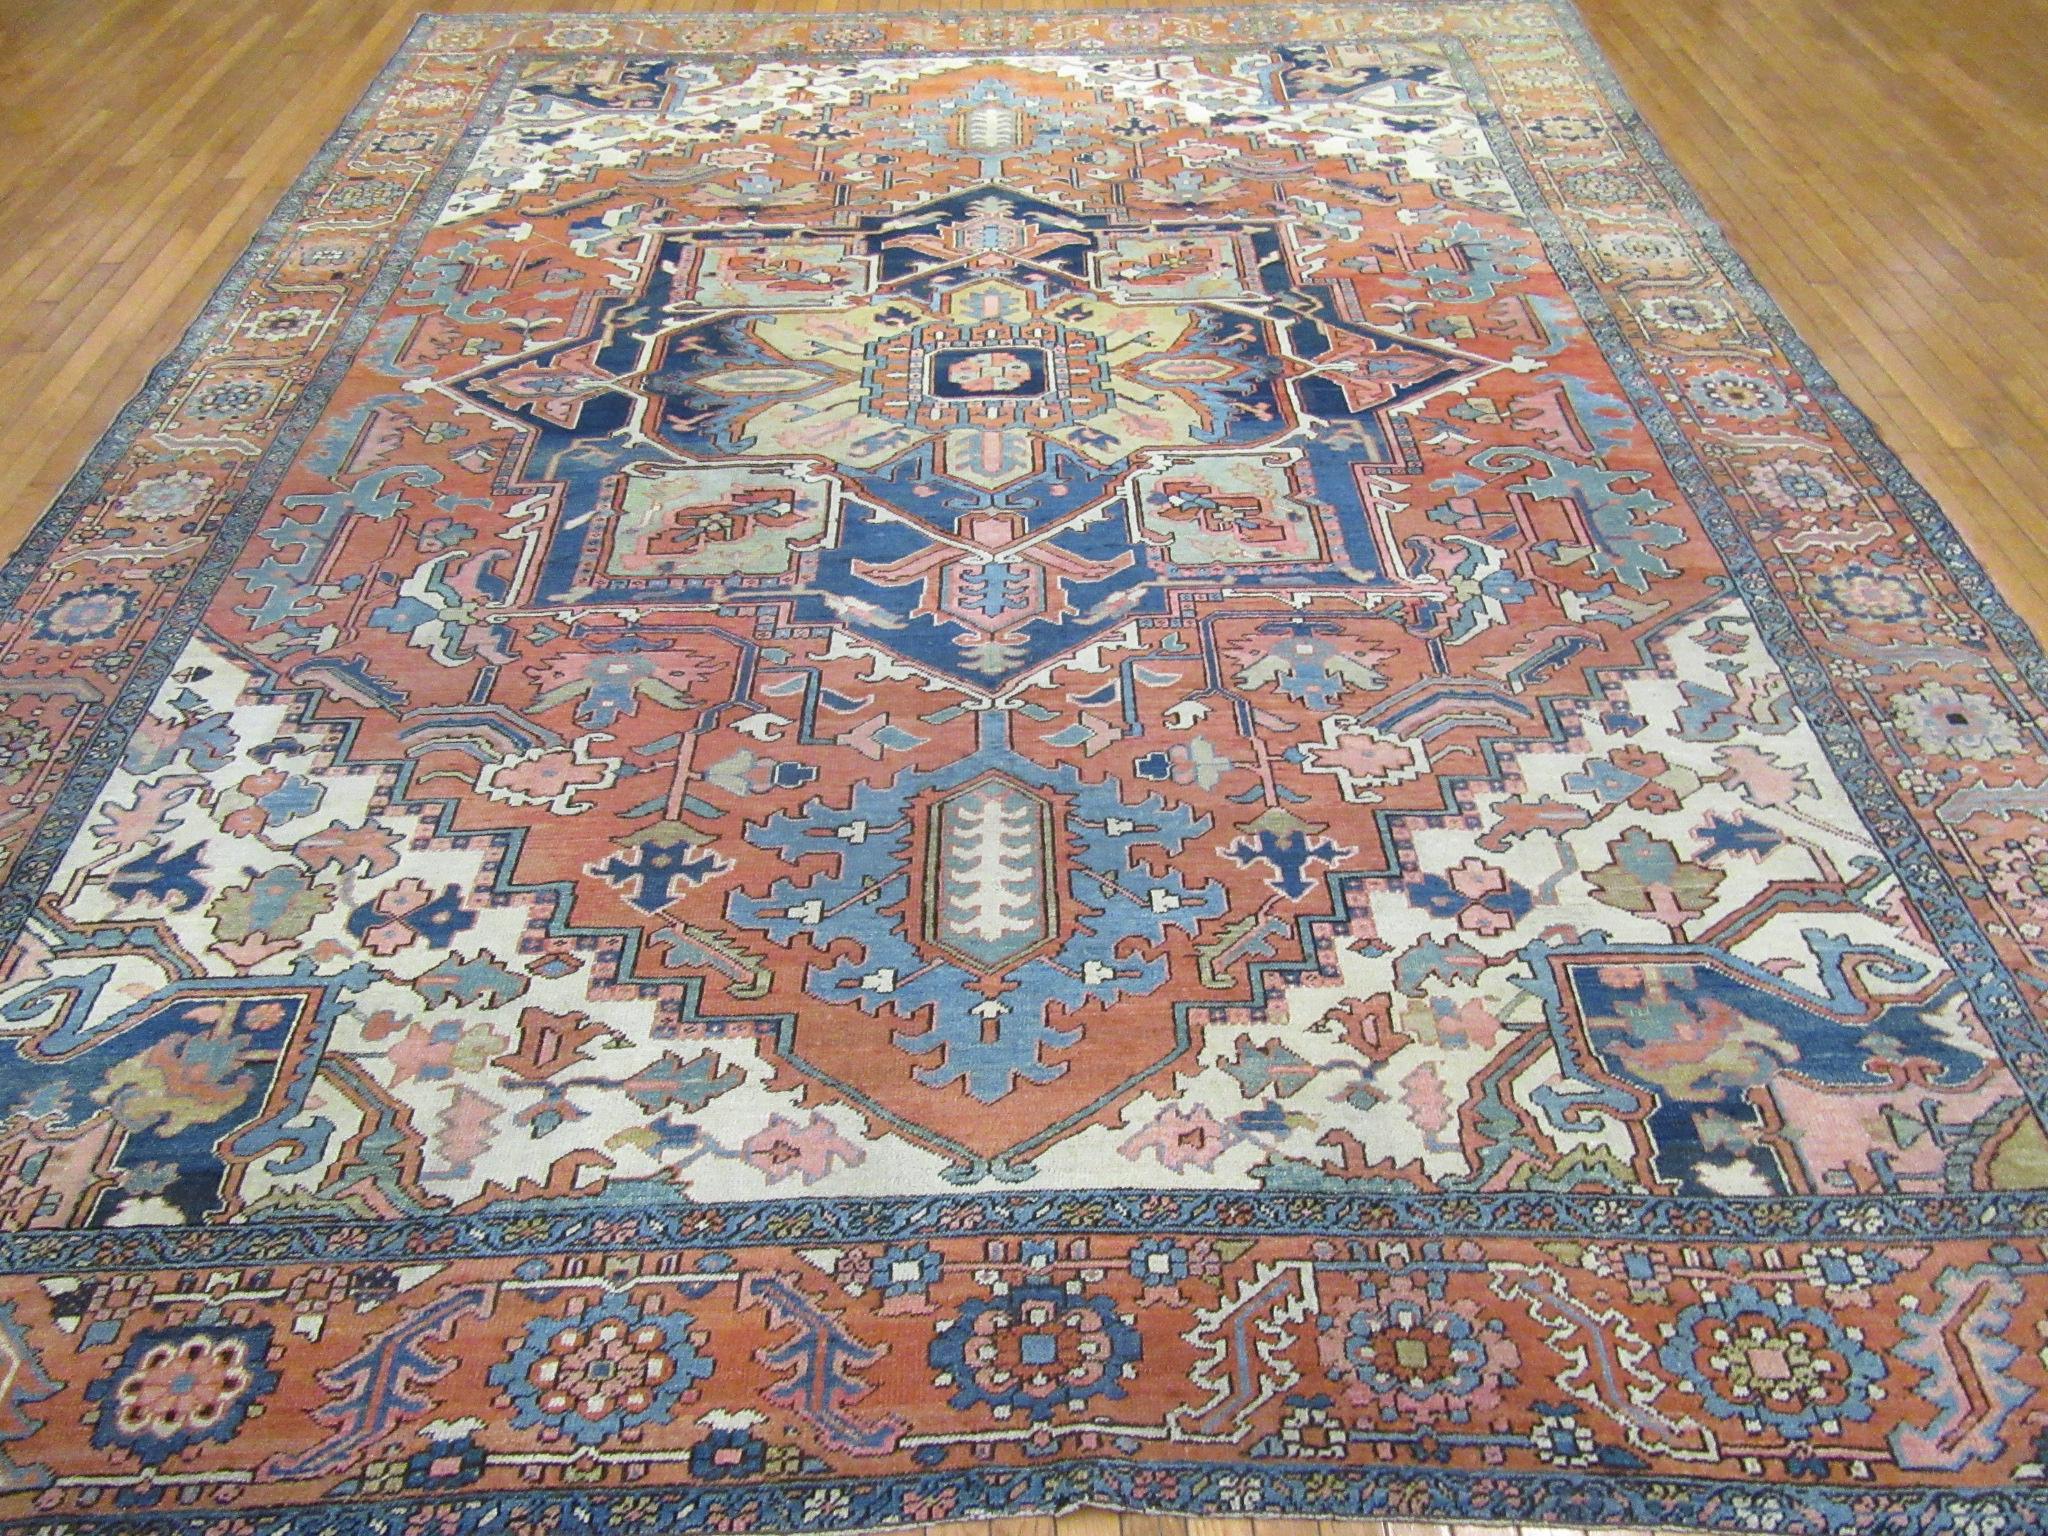 This is an antique hand knotted room size Persian Serapi rug. It is made with wool on cotton foundation in the Classic traditional geometric central and corner medallion design a trade mark of rugs coming from this region. The rug measures 10' x 13'